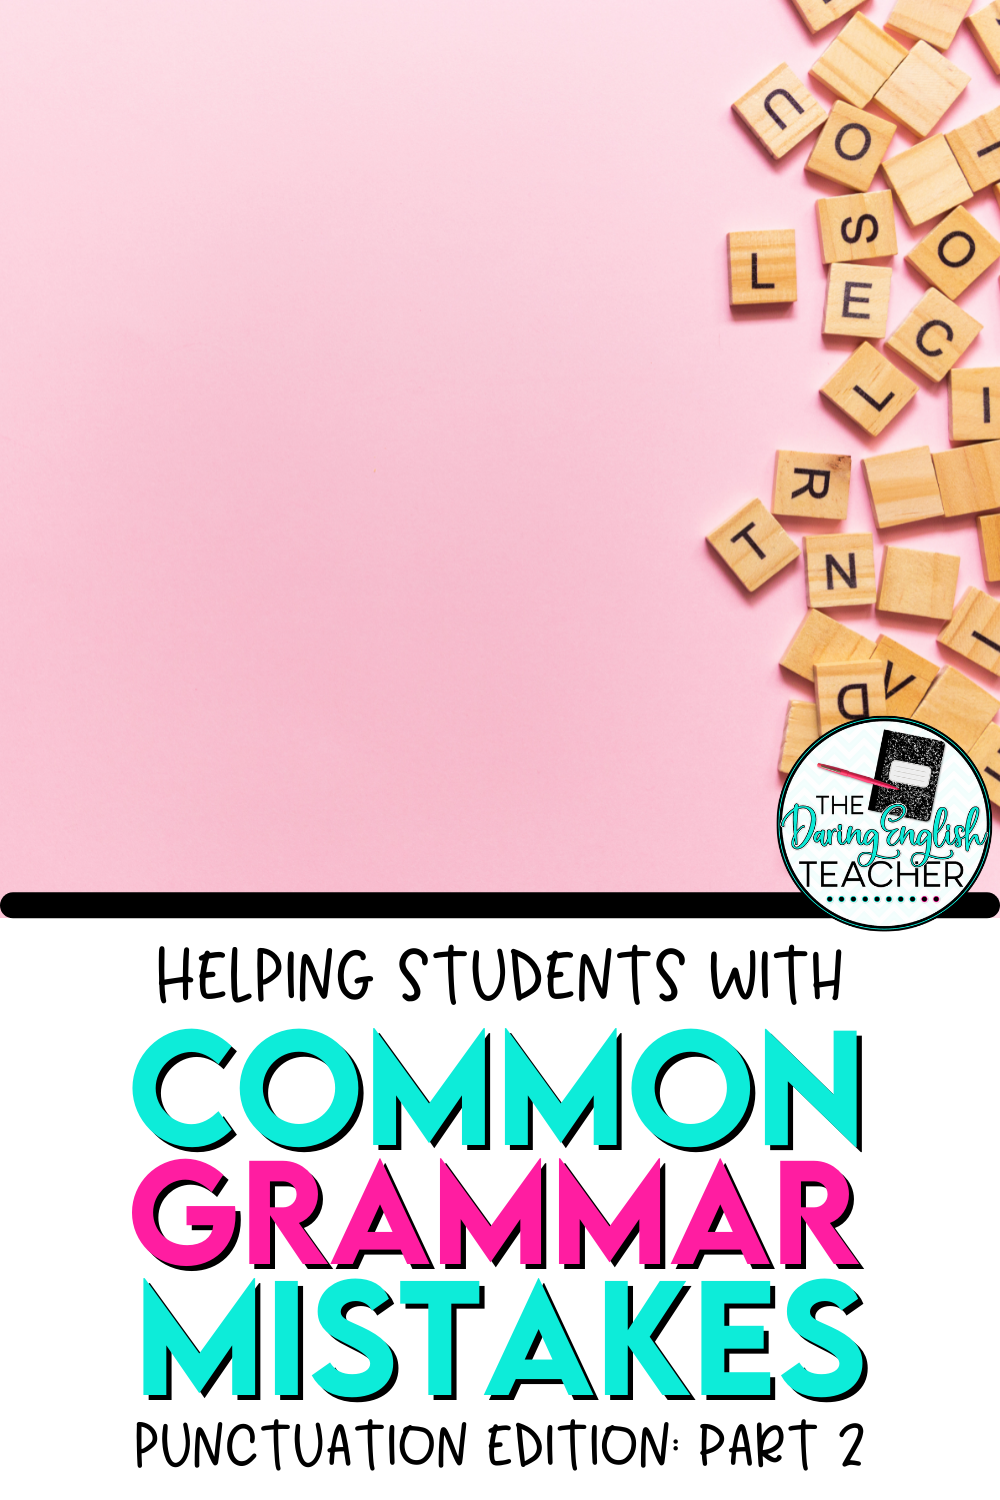 Common Grammar Mistakes: Punctuation Edition, Part II - Apostrophes and Commas